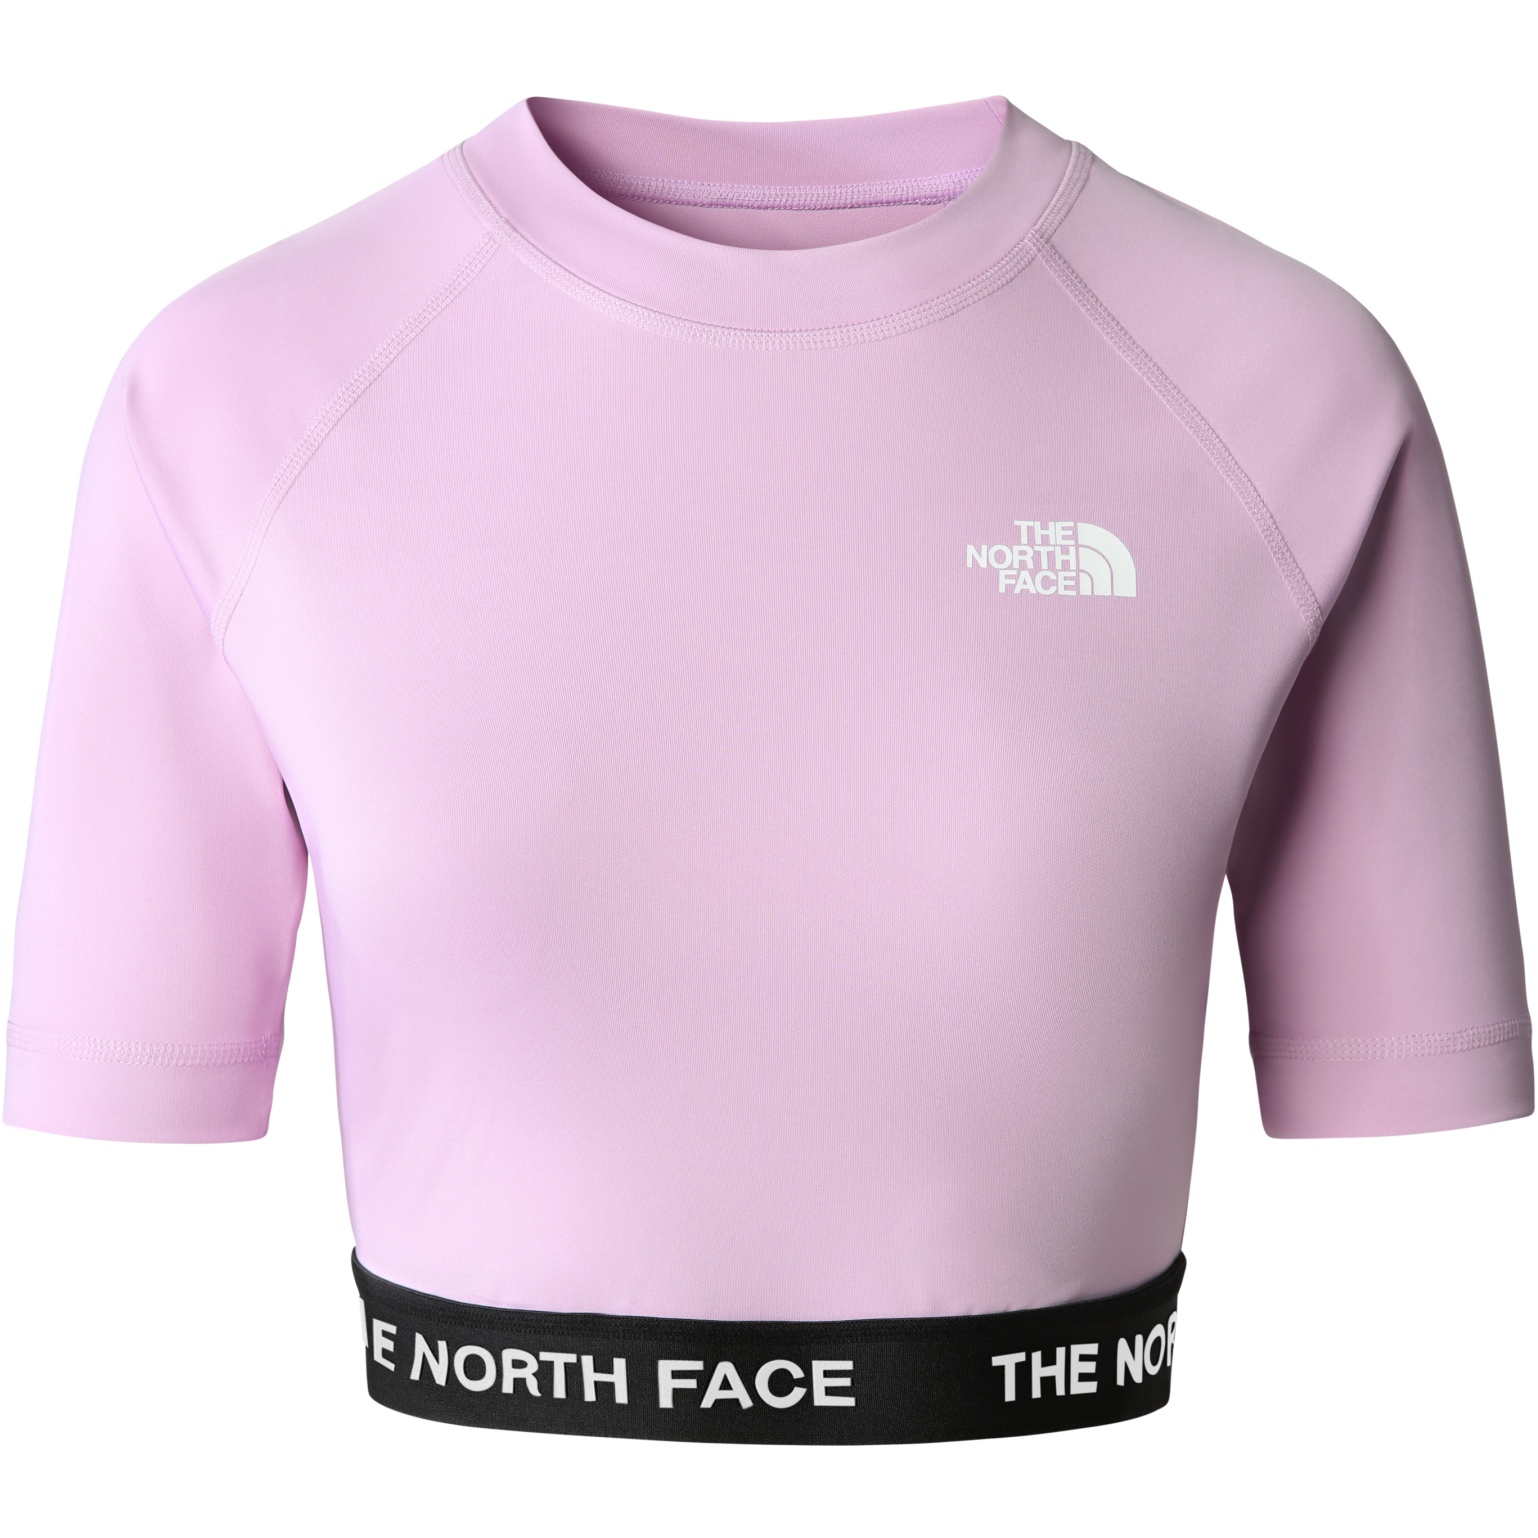 Foto de The North Face Top Crop Mujer - Performance - Lupine